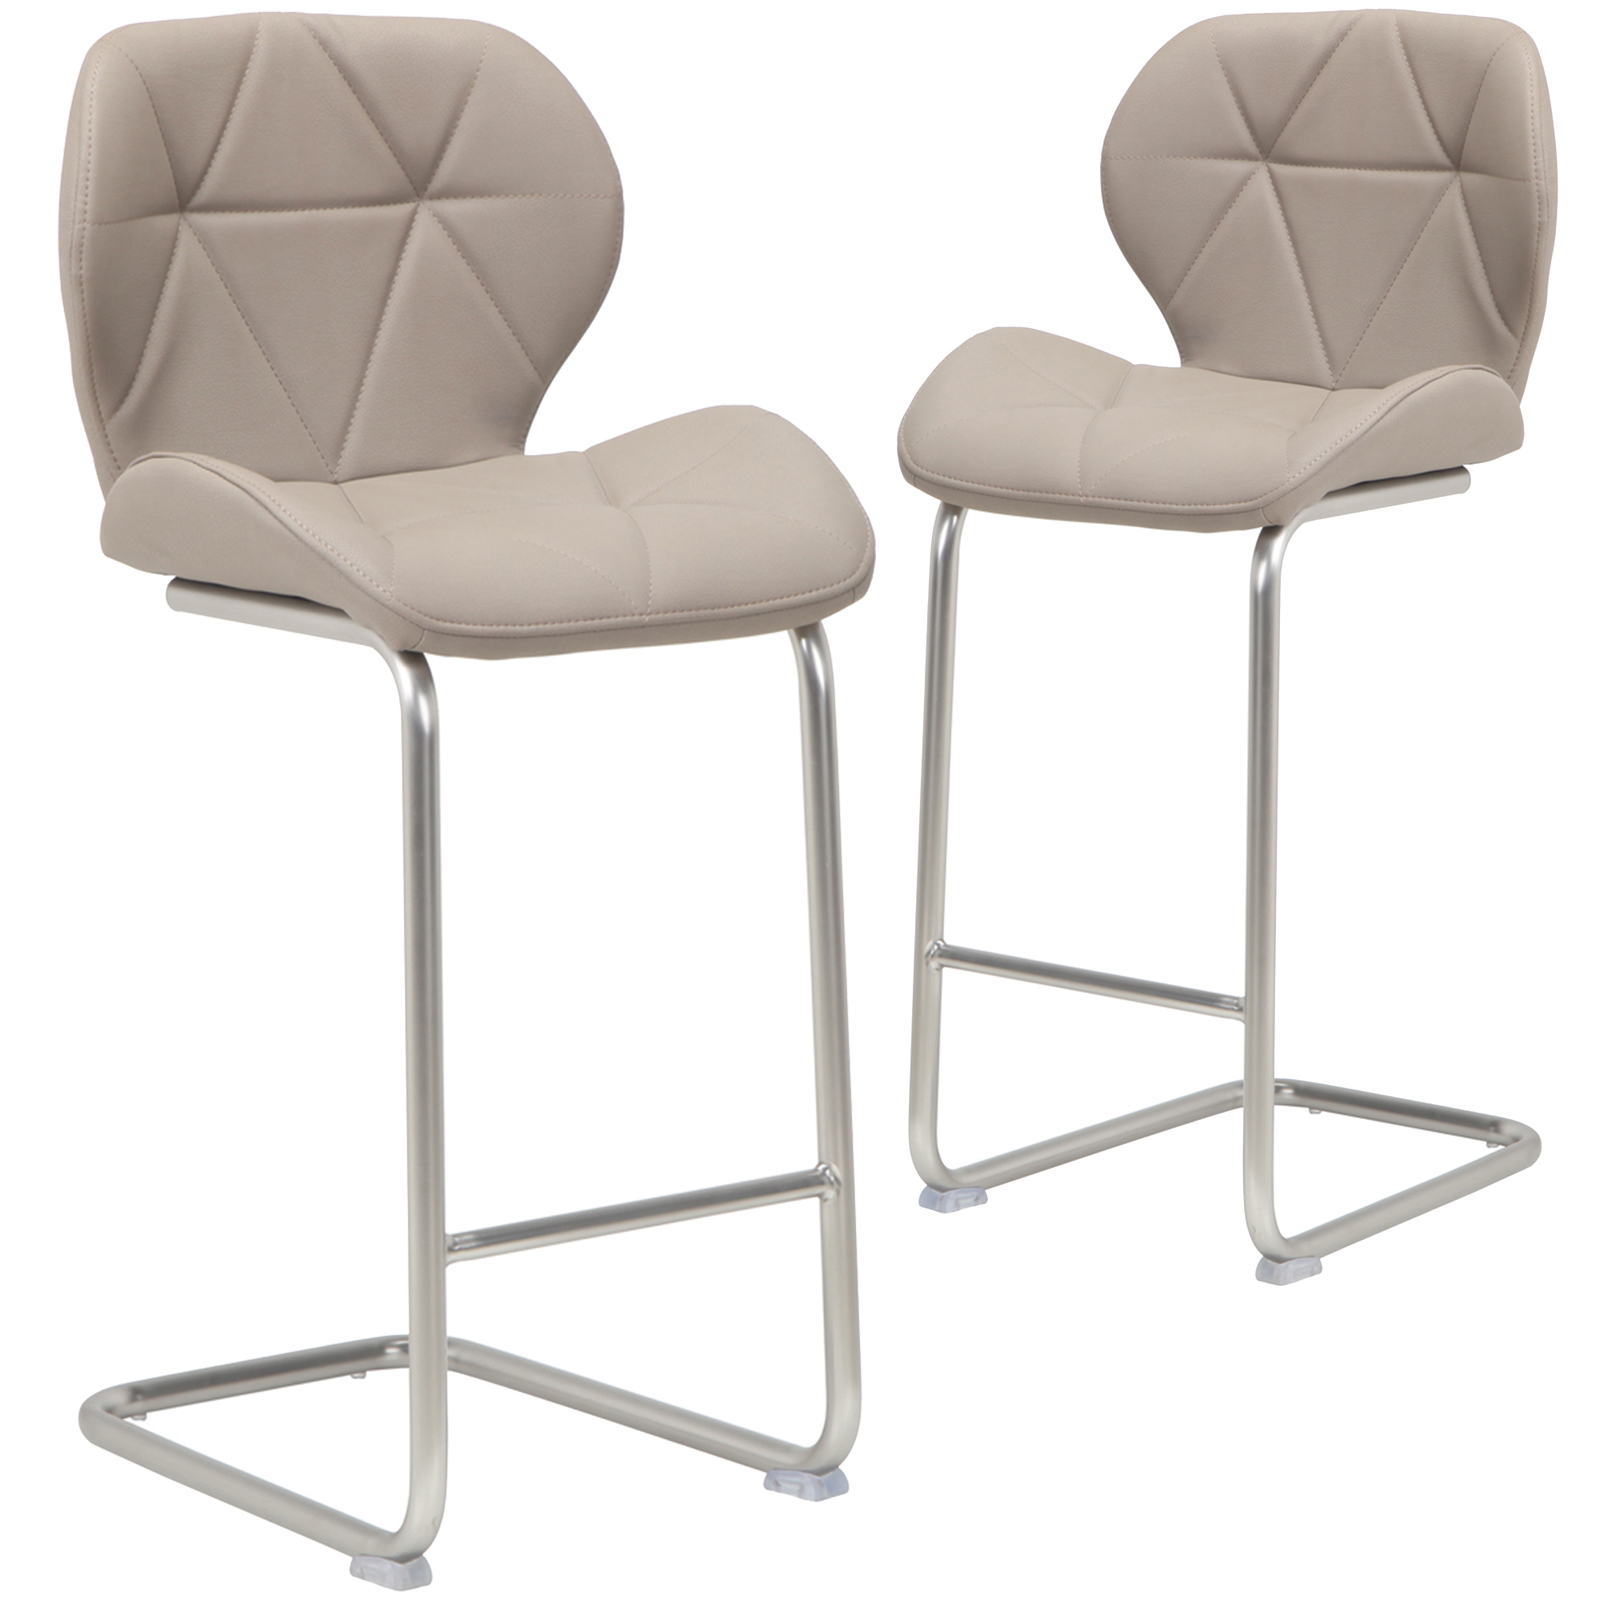 Torque Faux Leather Barstools, Cappuccino Set of 2